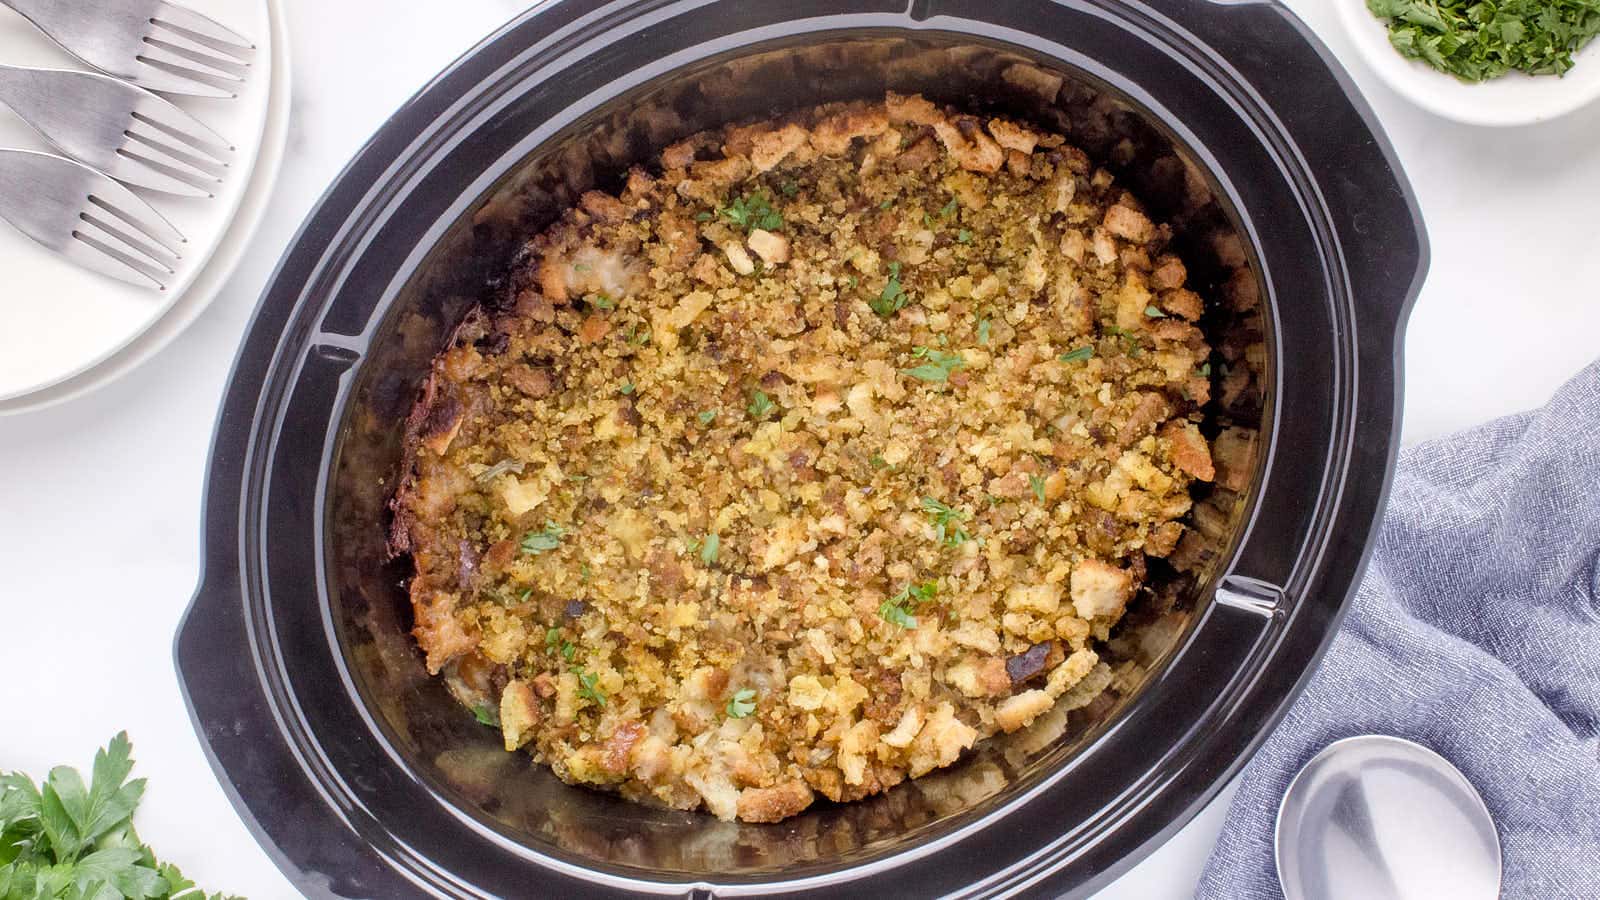 Crockpot Chicken and Stuffing recipe by Cheerful Cook.